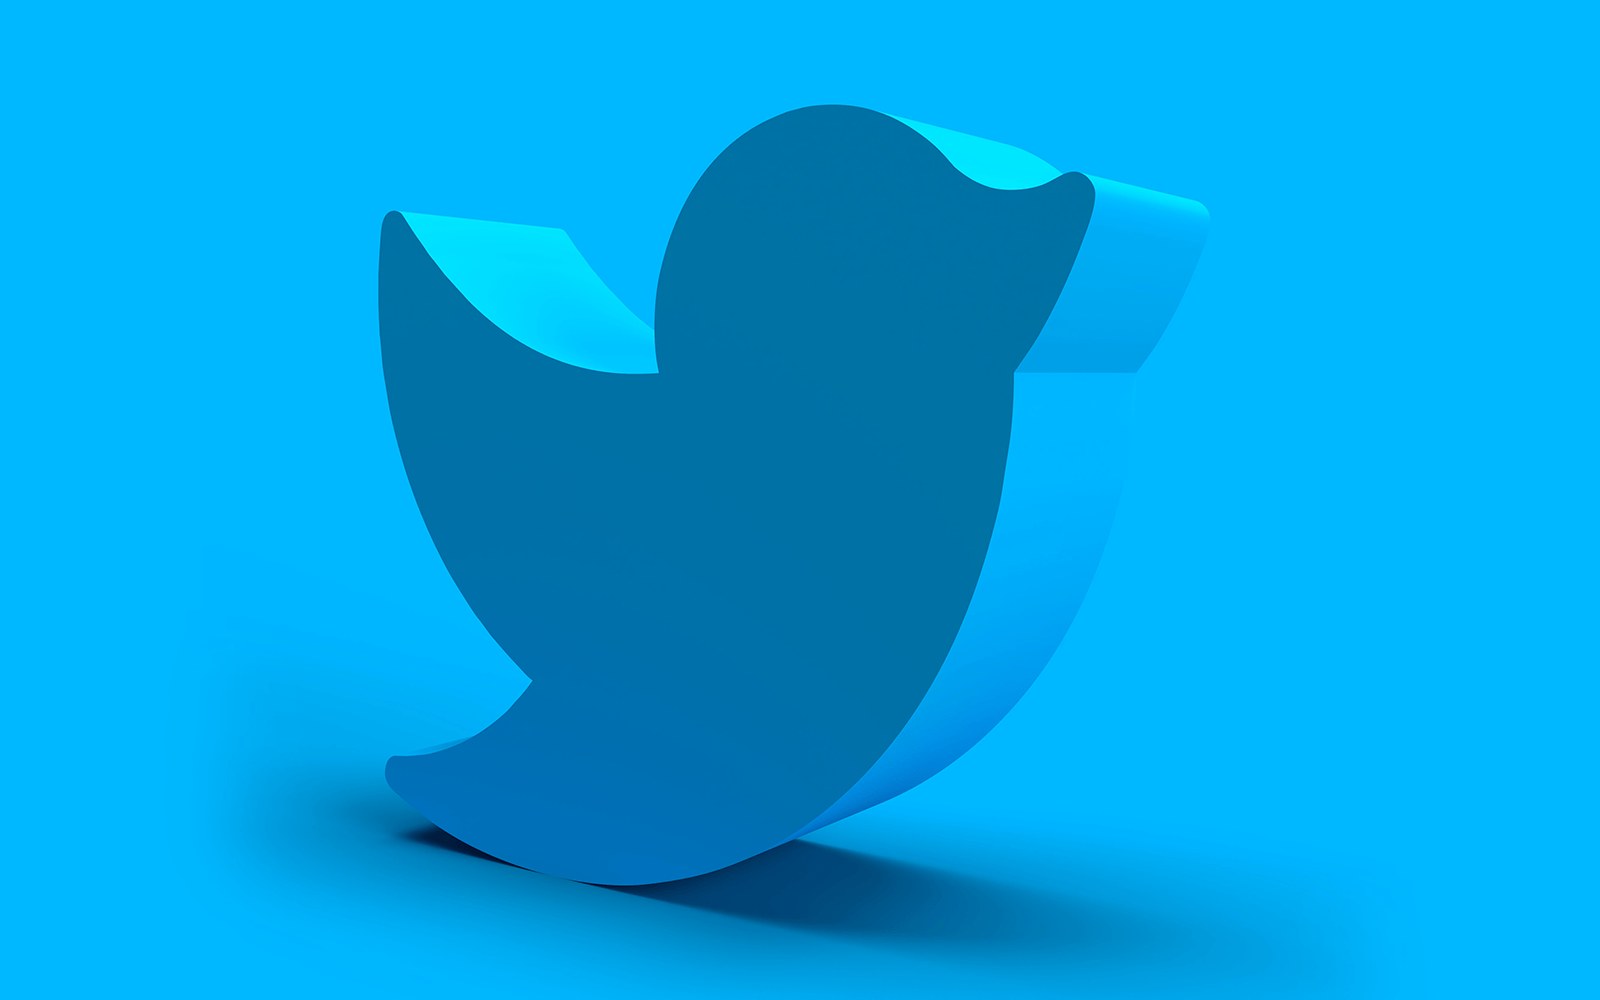 A 3D render of Twitter's logo on a blue background